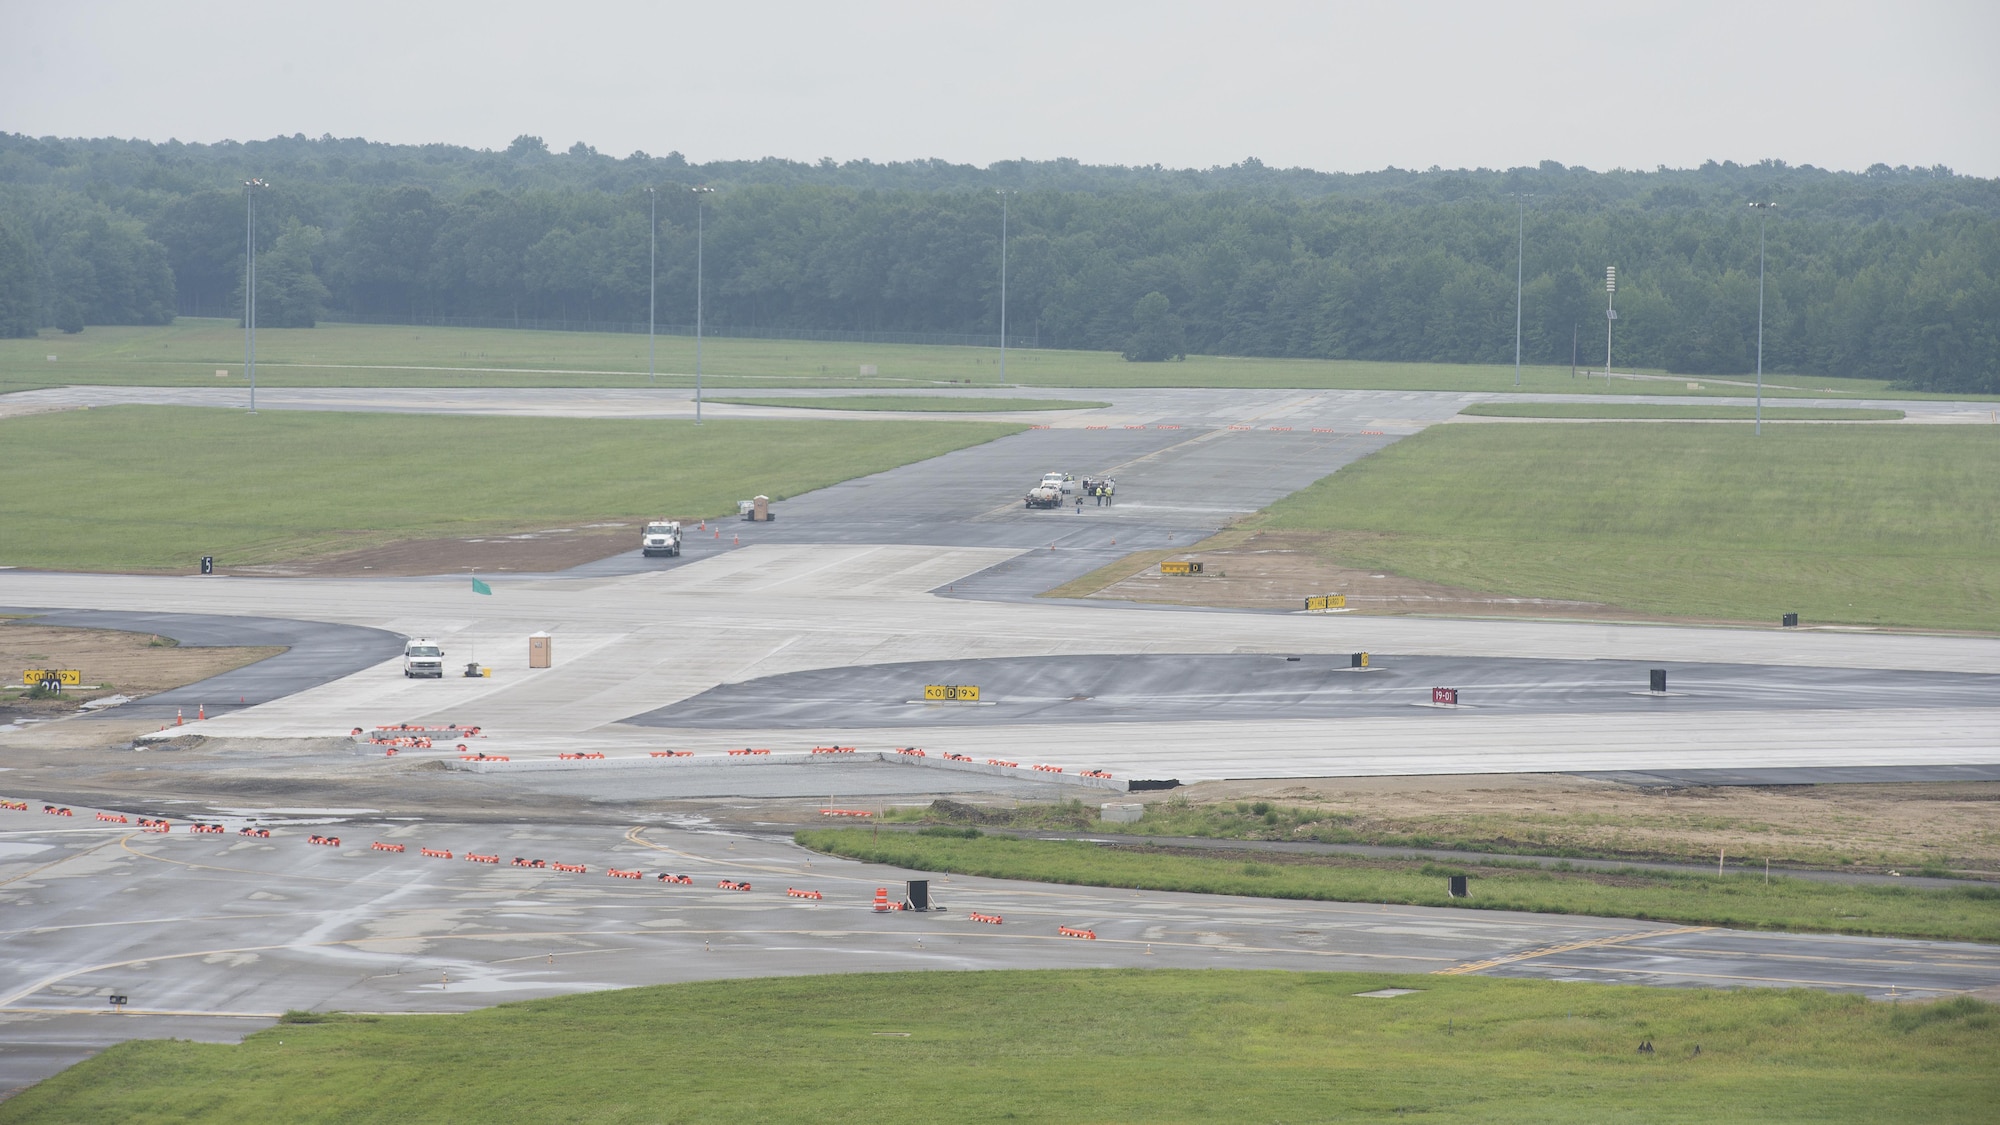 The intersection of Runway 01-19 and Runway 14-32 is under construction Sept. 1, 2016, on Dover Air Force Base, Del. Dover's shorter Runway 14-32 will be closed to allow construction on a portion in close proximity to runway 01-19, and in addition, several taxiways. This portion of construction is anticipated for completion in summer 2017. (U.S. Air Force photo by Senior Airman Zachary Cacicia)